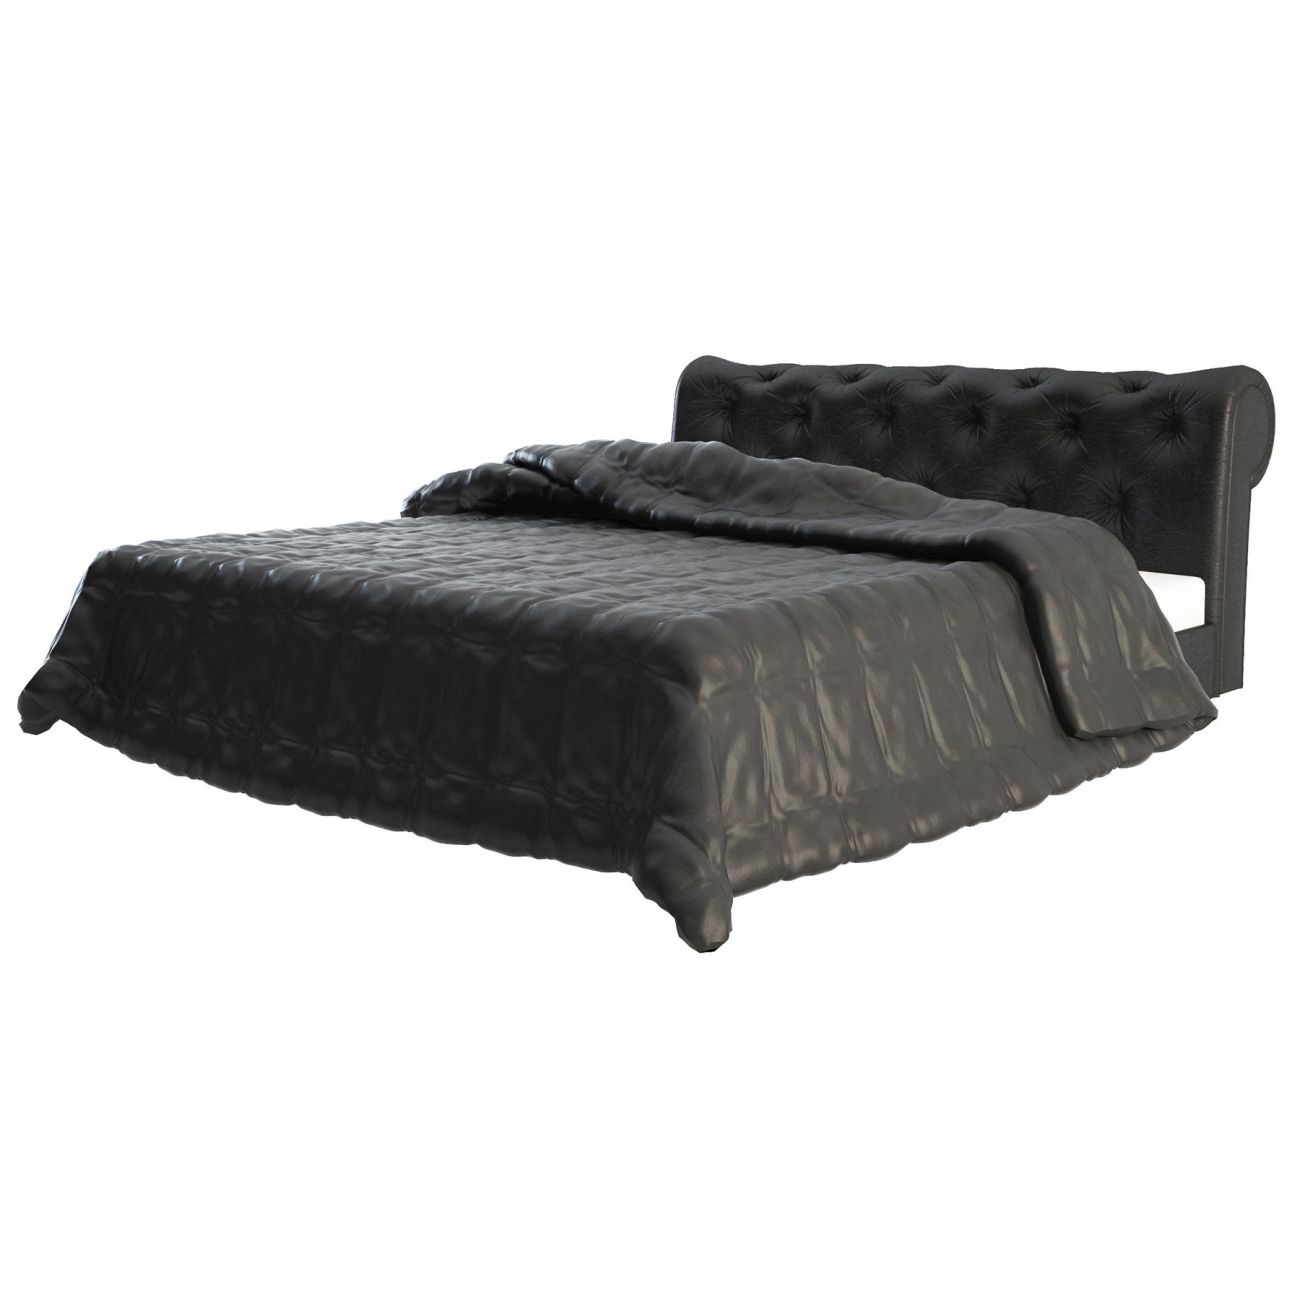 Double bed 160x200 black eco-leather Adelle